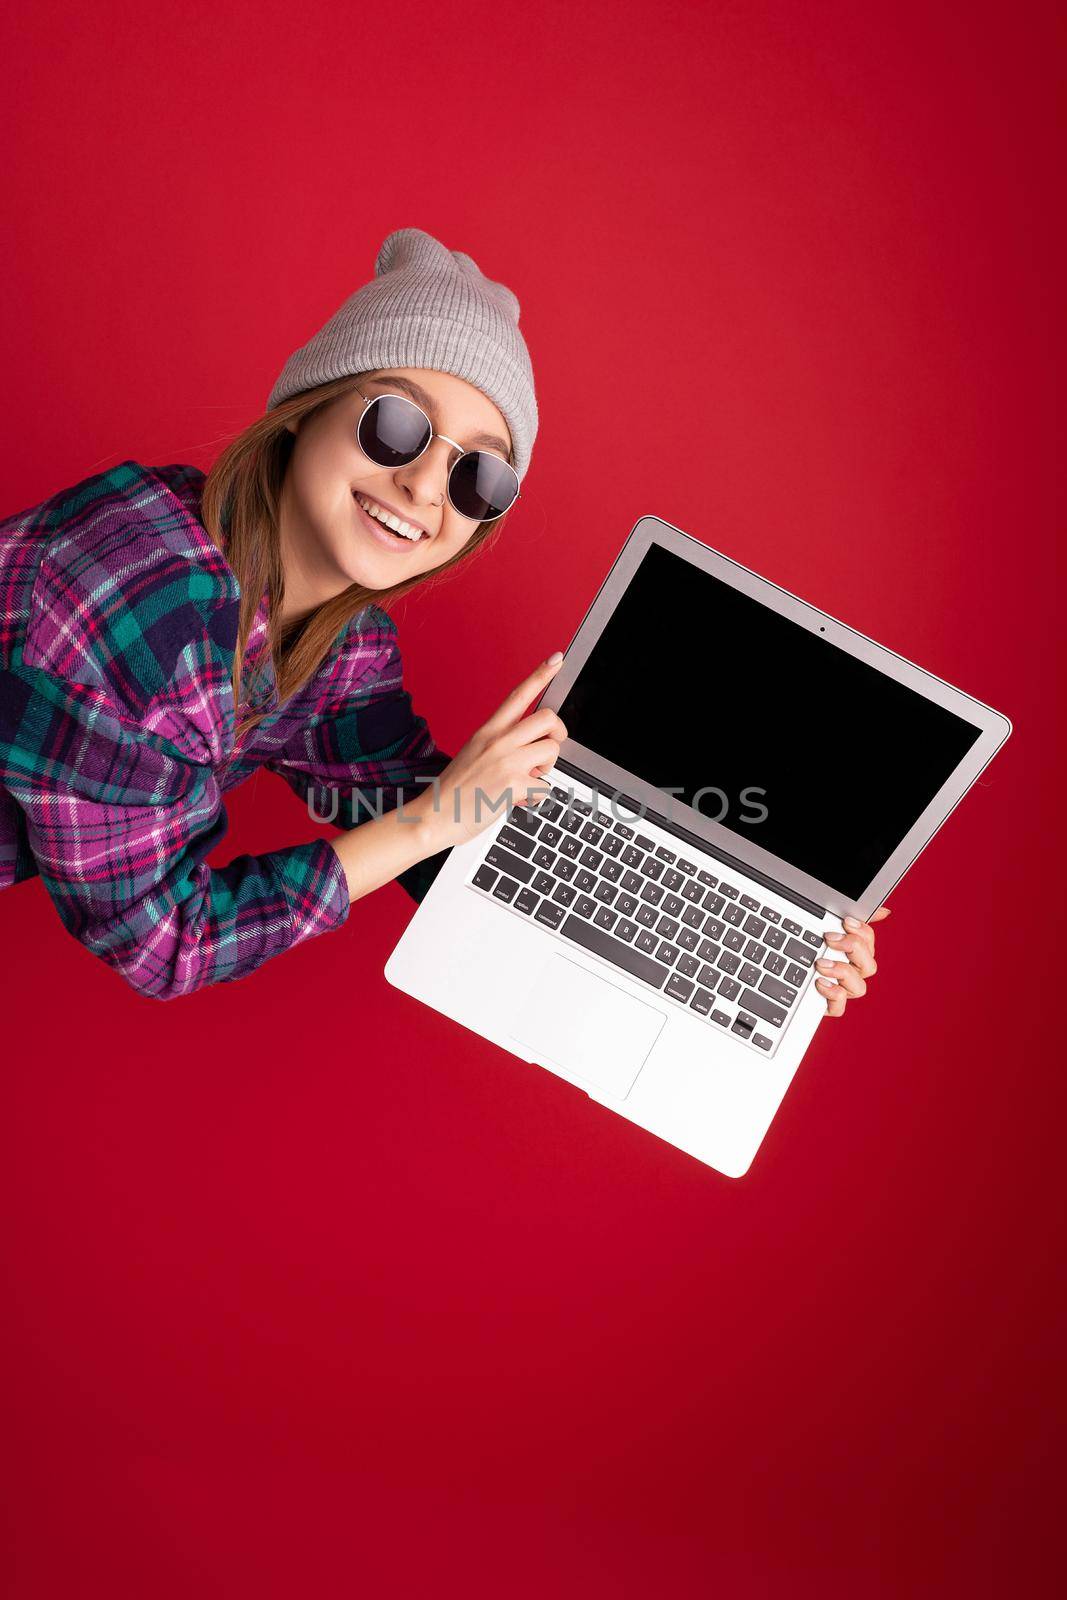 Close-up portrait of crazy mad overjoyed Beautiful smiling happy young woman holding netbook computer looking at camera having fun wearing sunglasses colourful shirt grey hat isolated over red wall background. Copy empty space for information, advertisement, advertising.